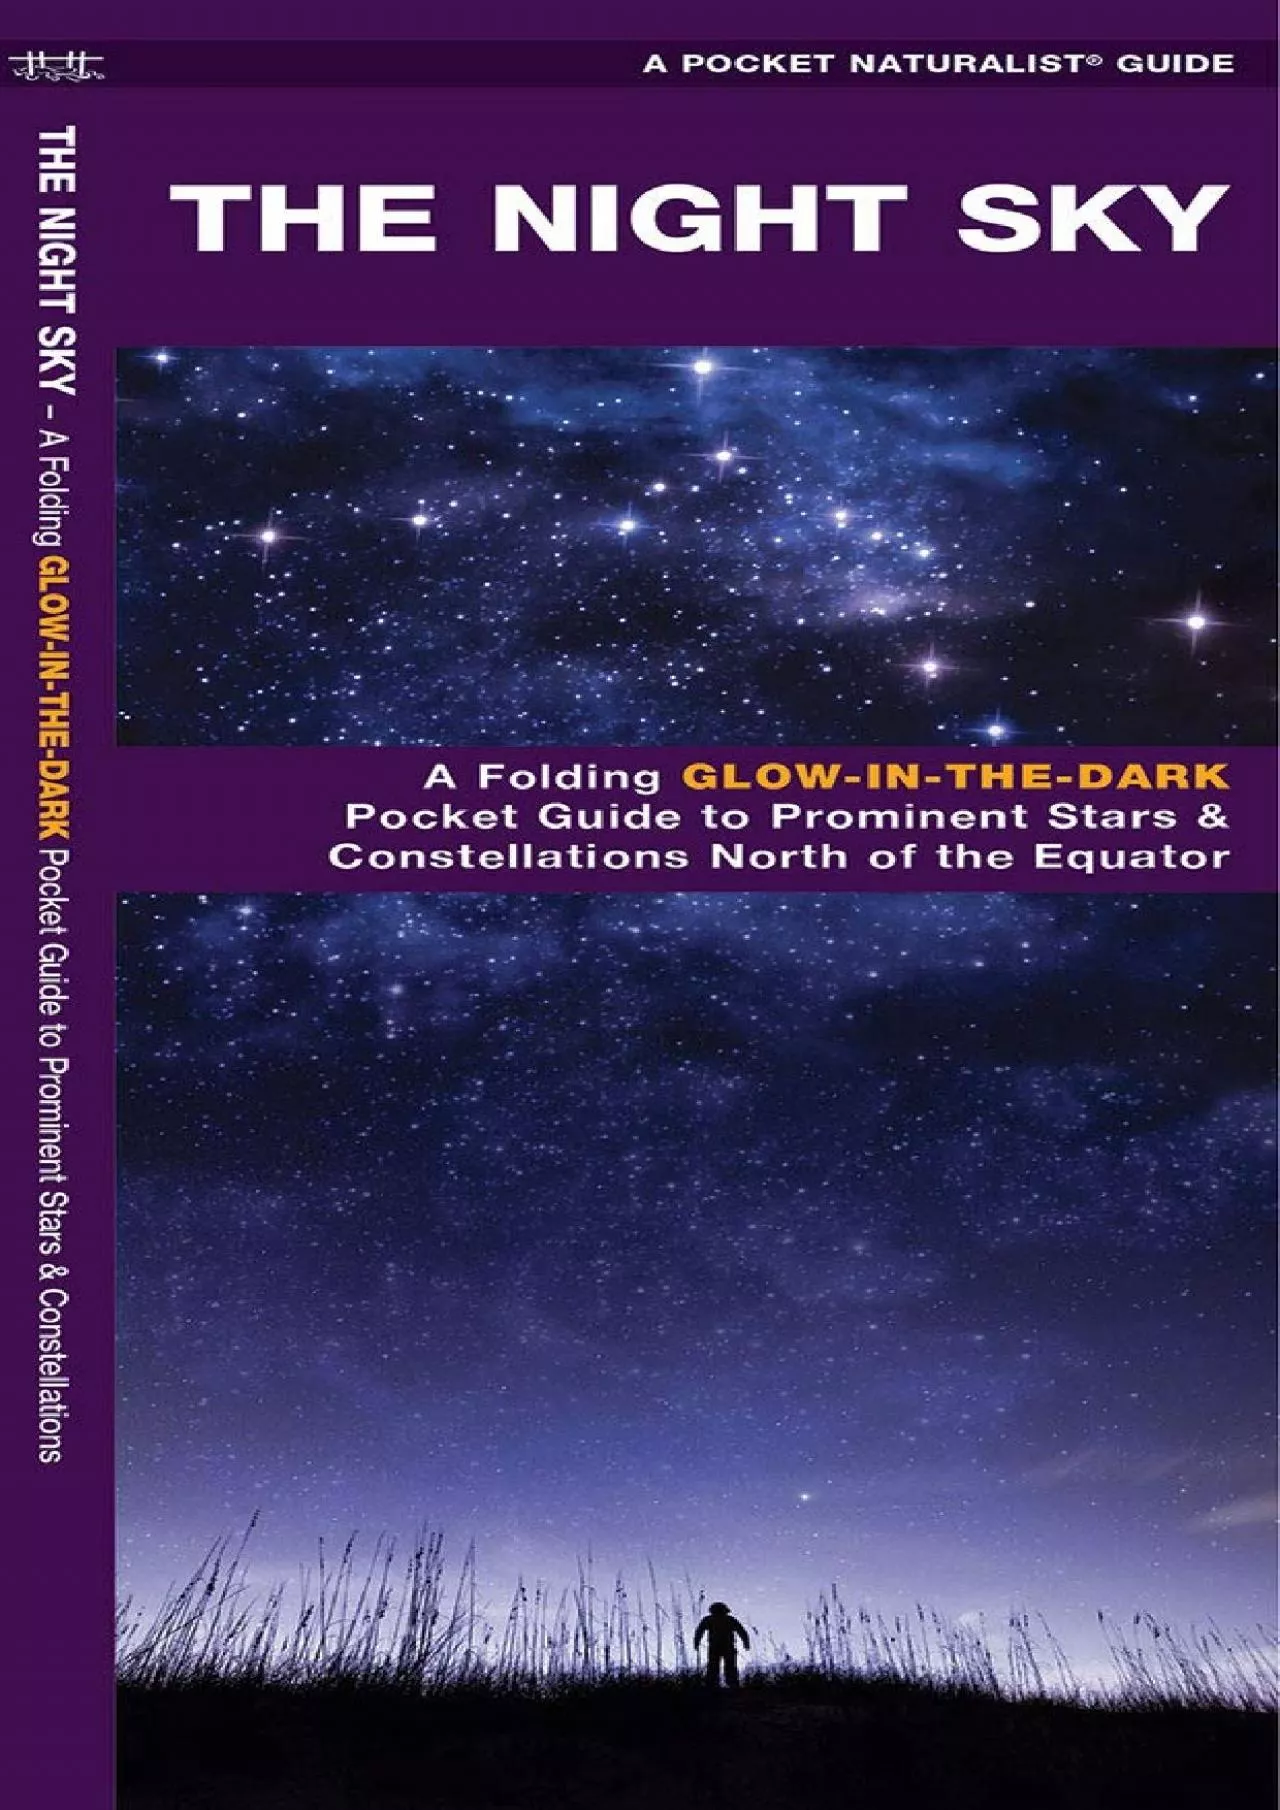 (EBOOK)-The Night Sky: A Glow-in-the-Dark Guide to Prominent Stars & Constellations North